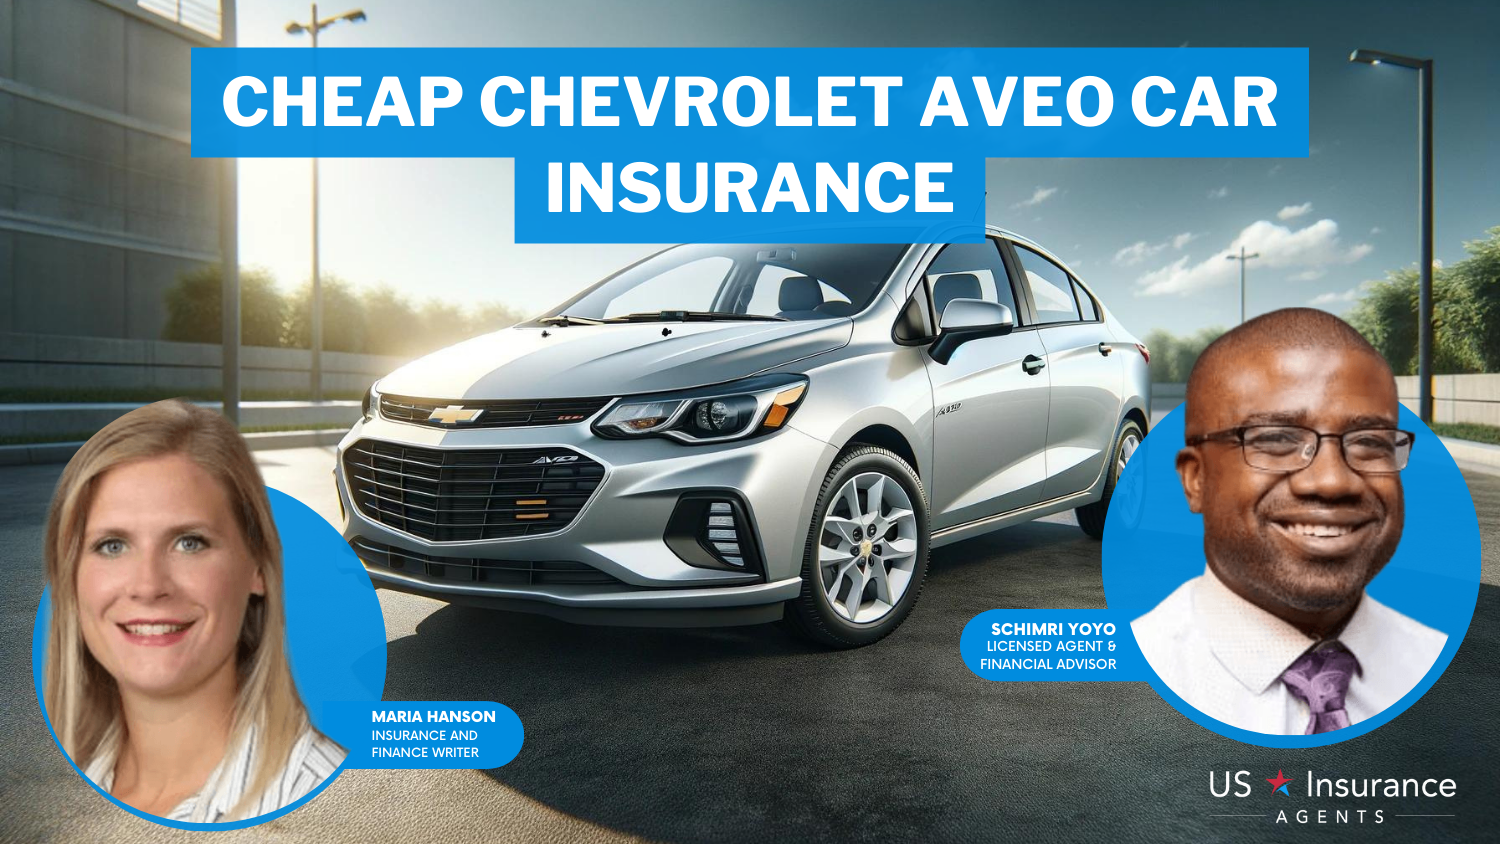 Cheap Chevrolet Aveo Car Insurance: Erie, State Farm, and Nationwide.